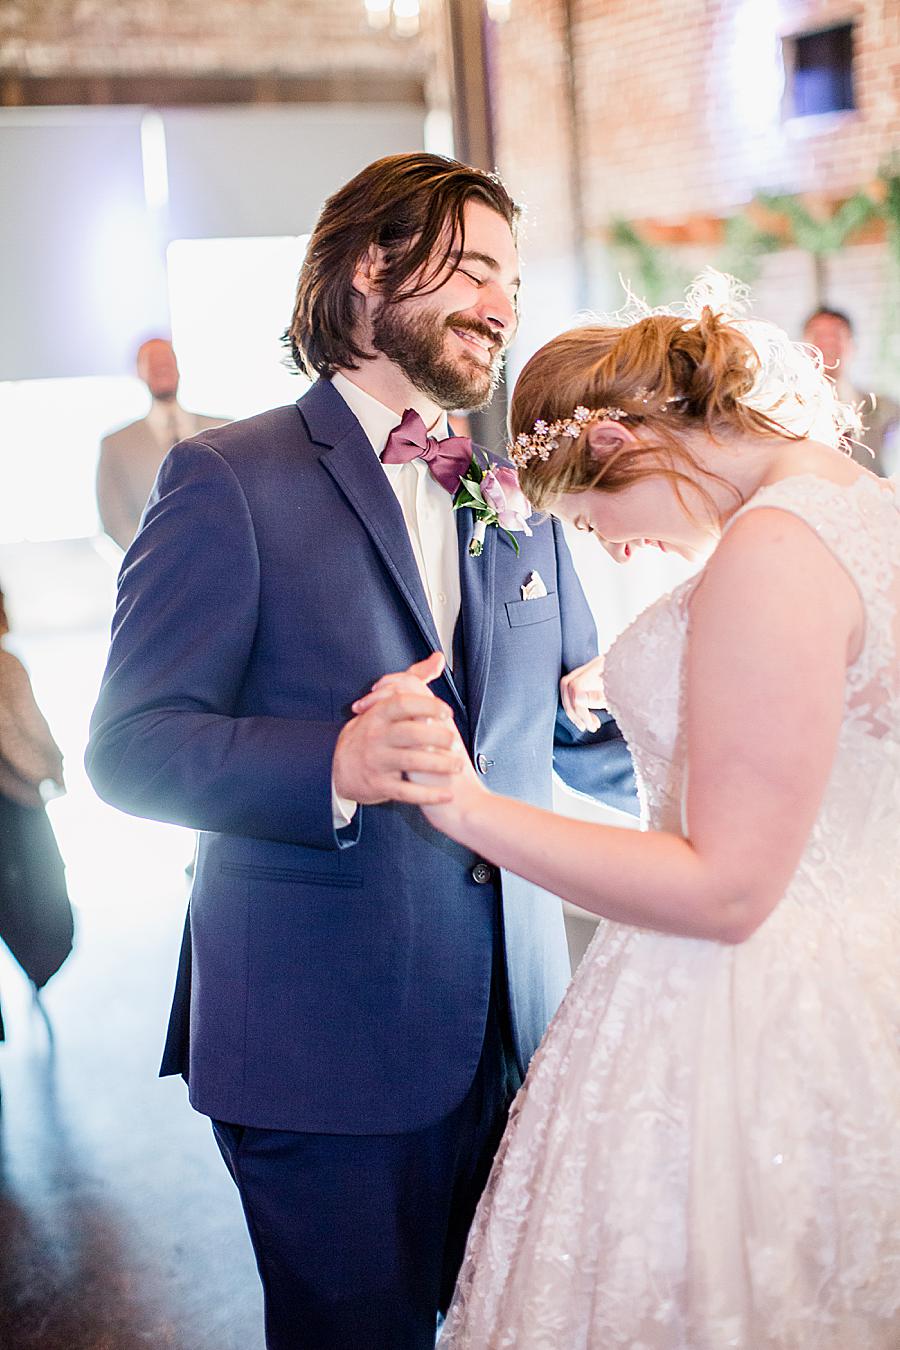 Happily married at this Relix Theater Wedding by Knoxville Wedding Photographer, Amanda May Photos.